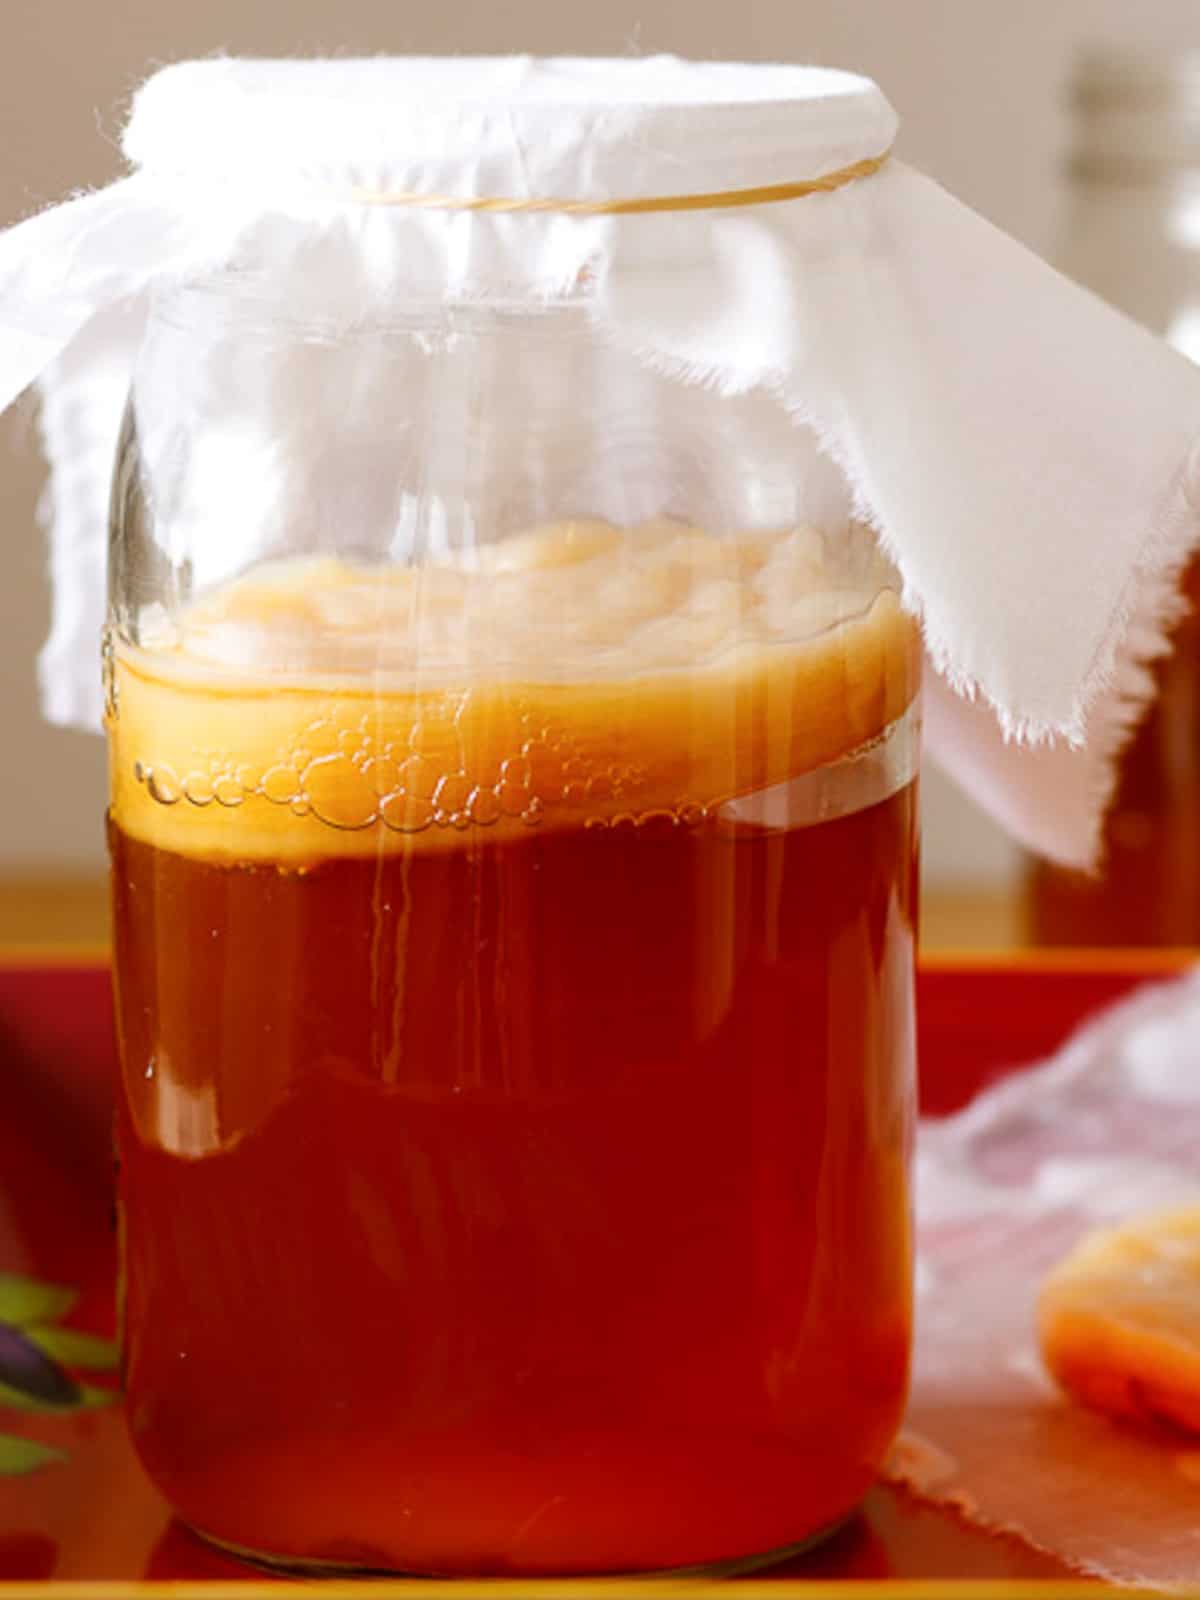 How To Make A Scoby - Simple Steps - Poppys Wild Kitchen